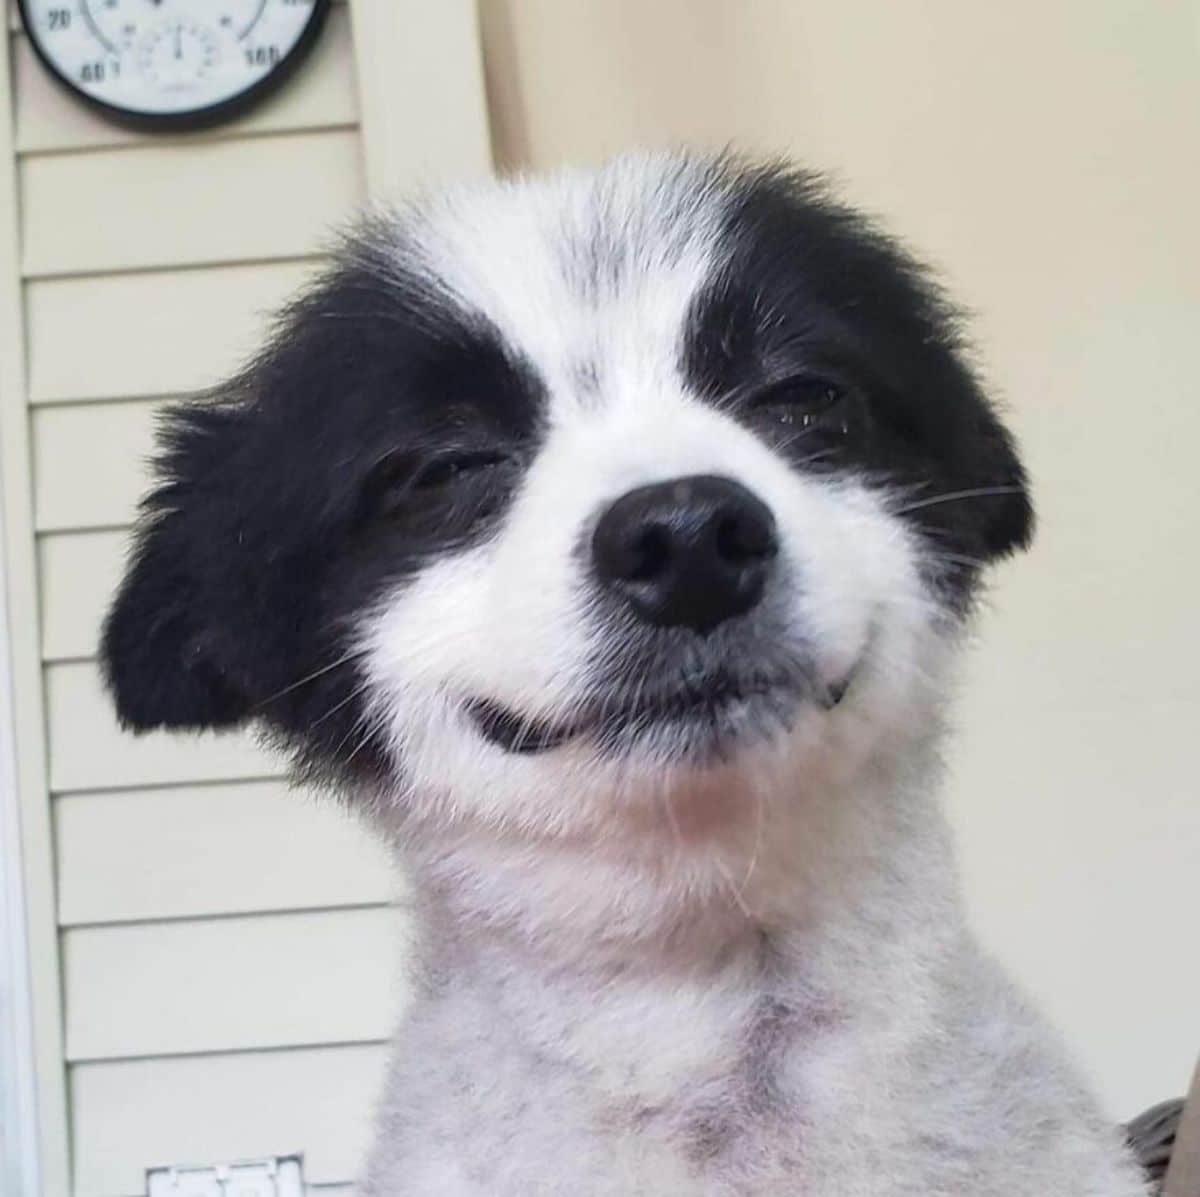 close up of black and white dog who looks like he's smiling with eyes closed